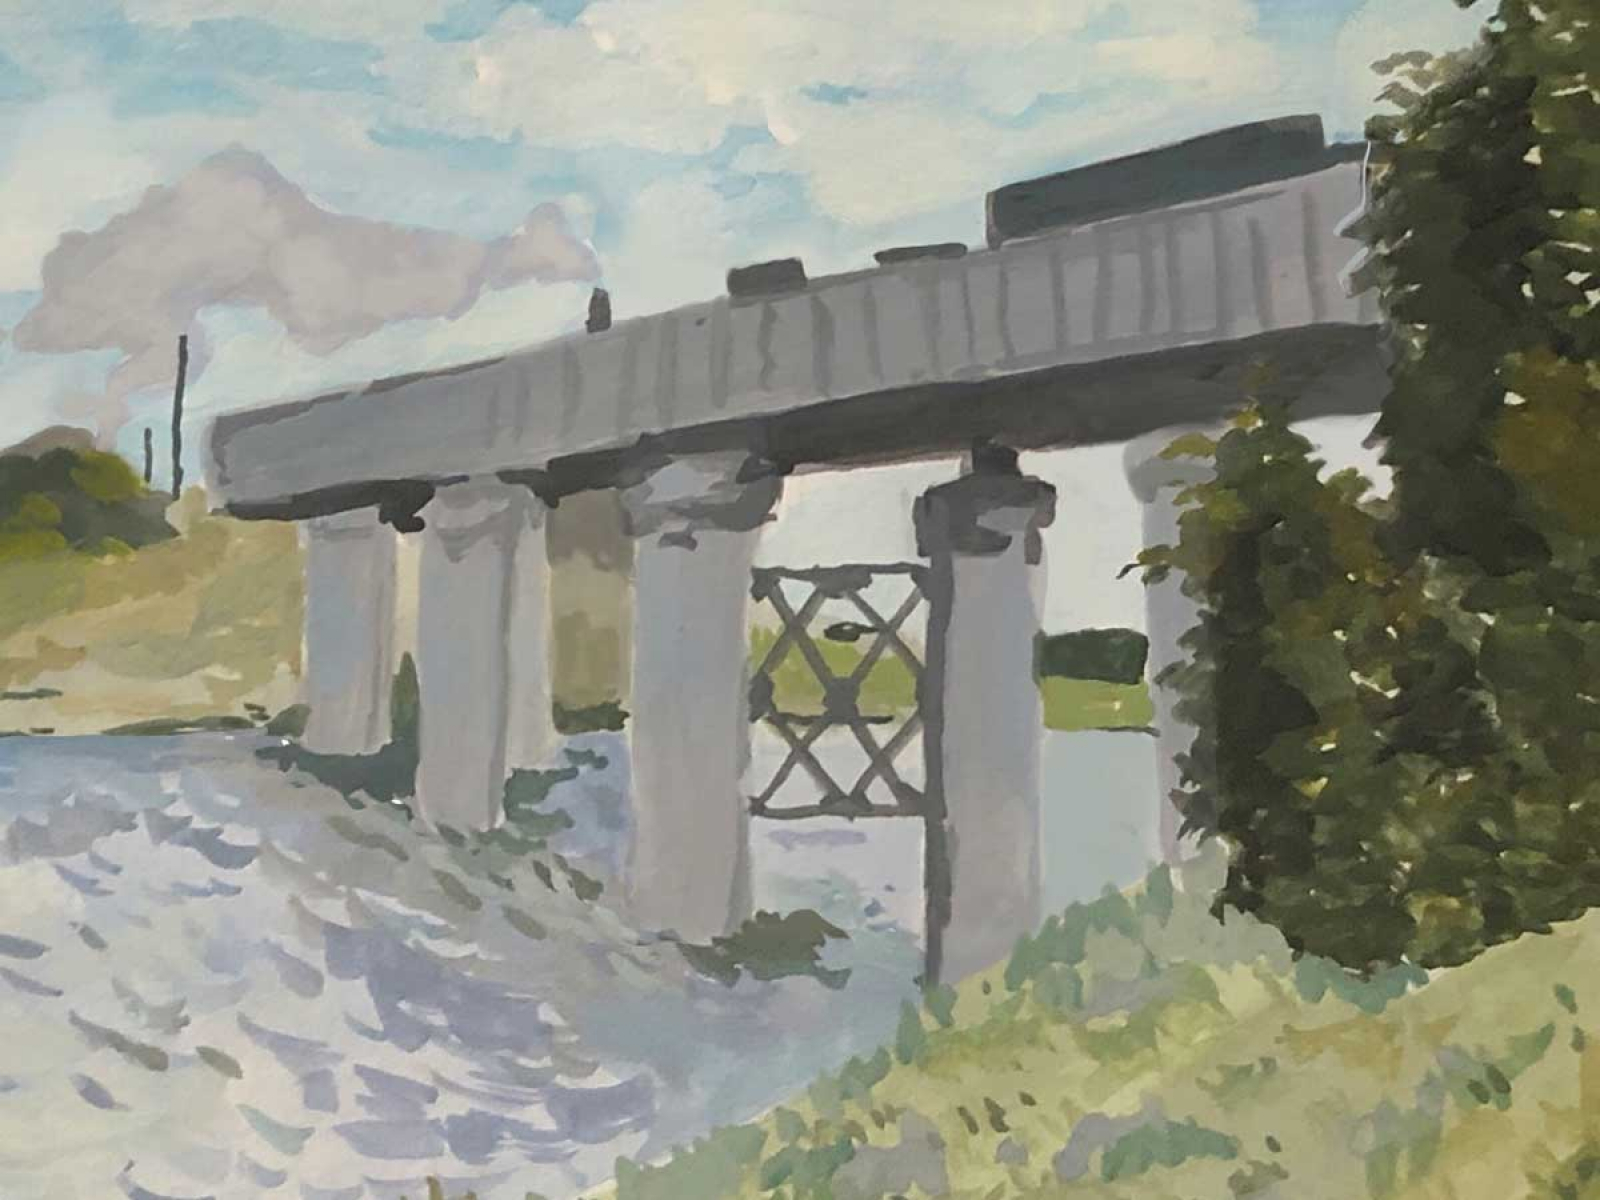 A painting of a train on a bridge over a river.